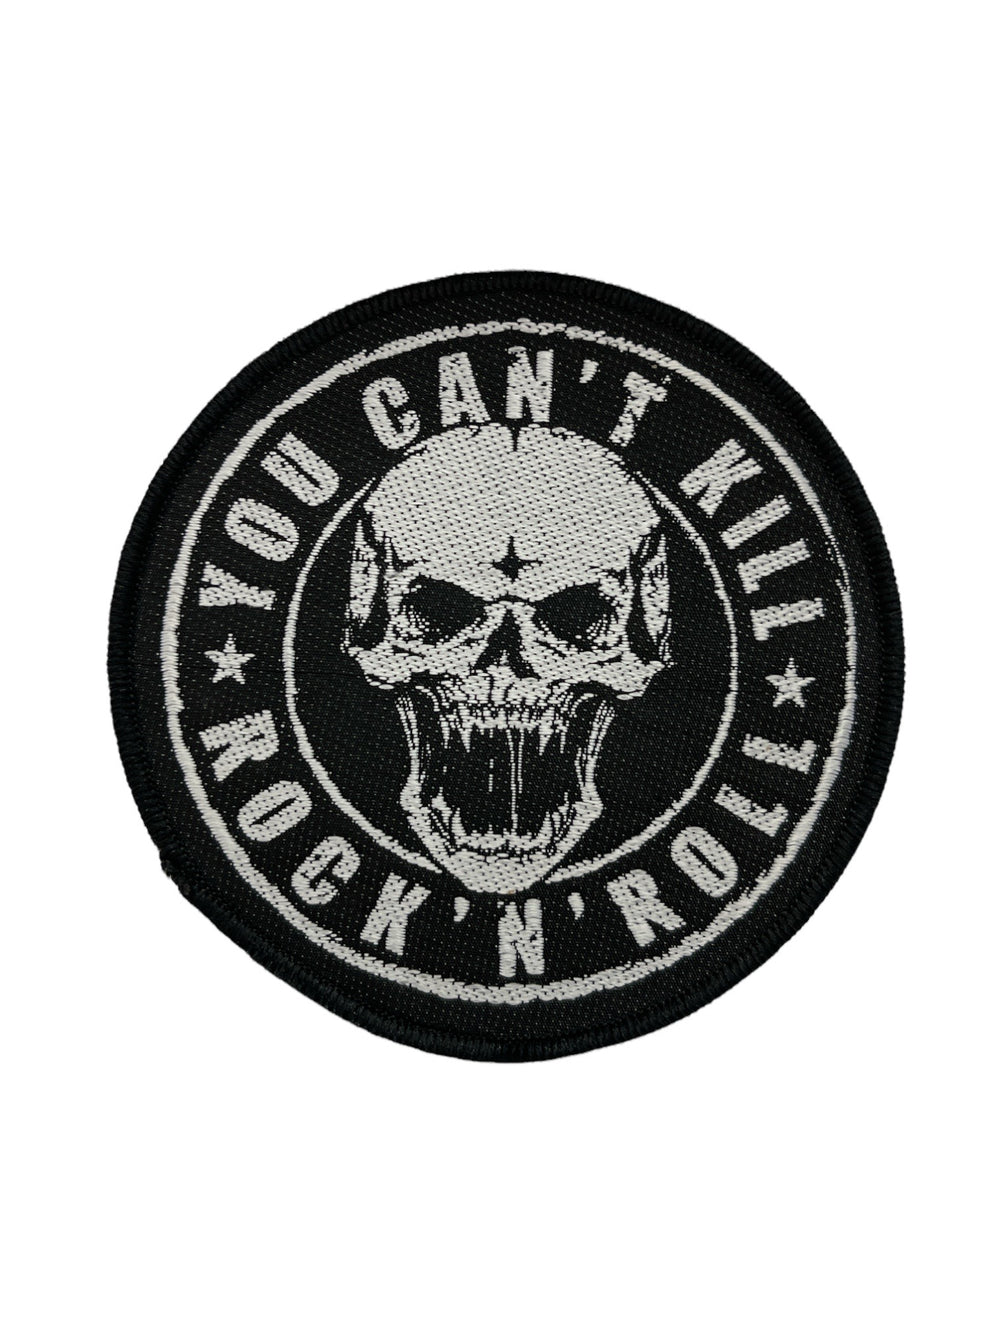 You Can't Kill Rock N Roll Official Woven Patch Brand New